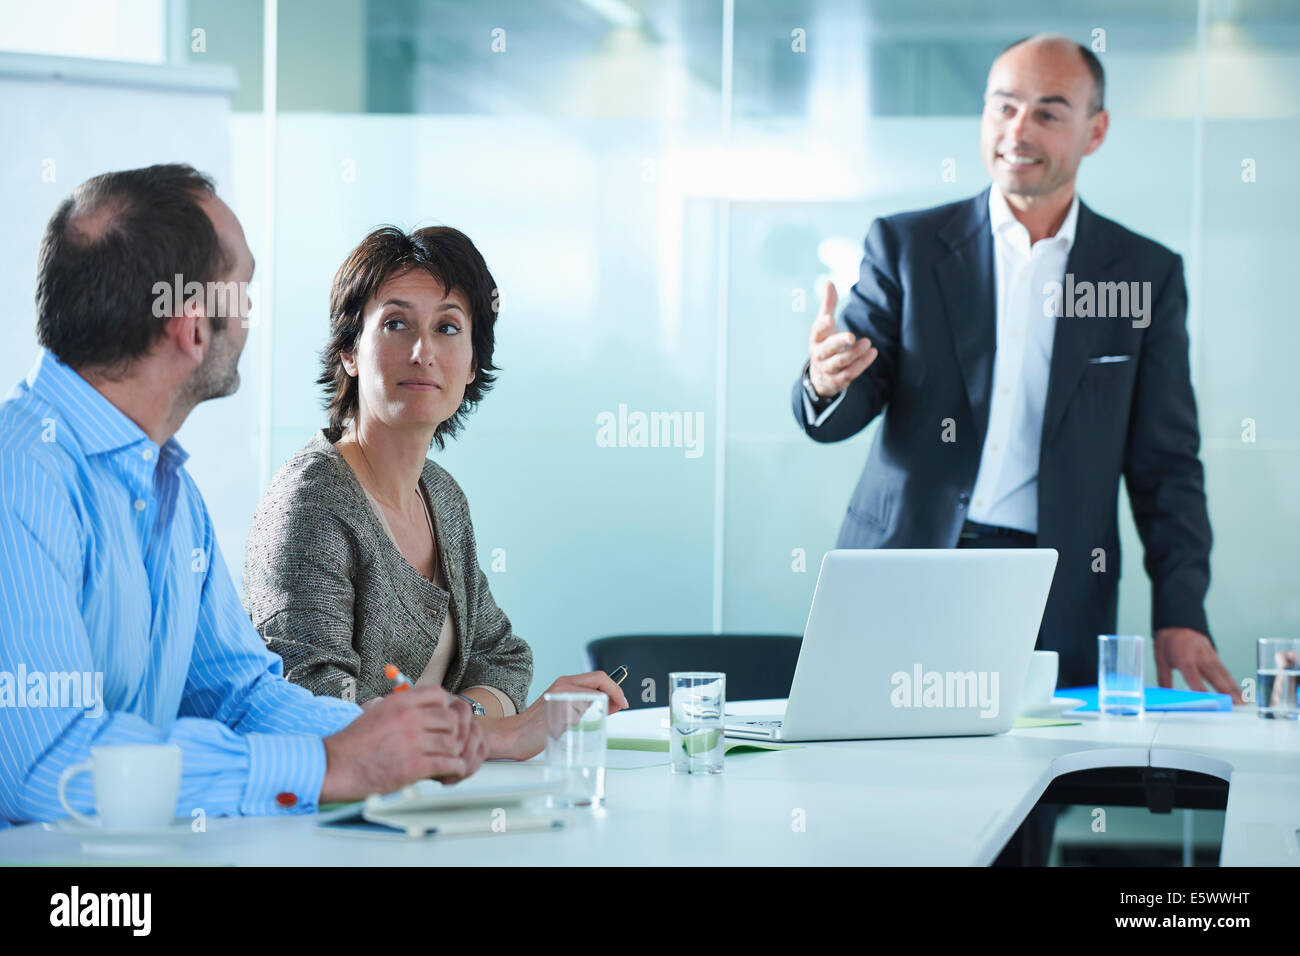 Businessmen and women arguing across boardroom table Stock Photo